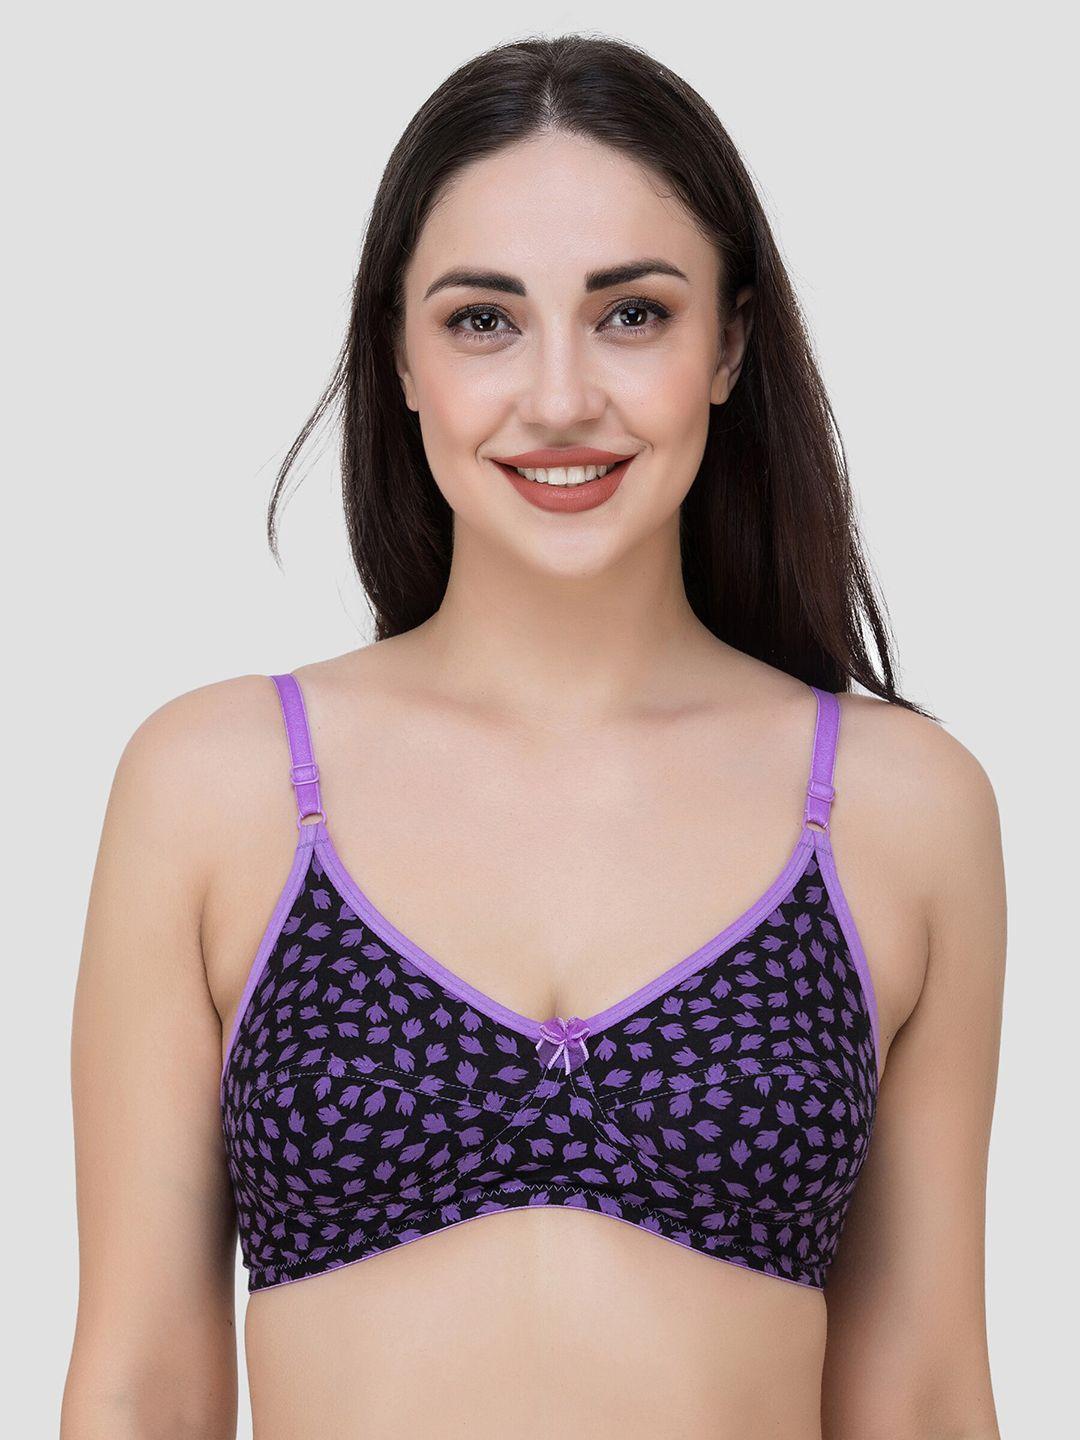 fasense-black-&-purple-printed-non-padded-non-wired-everyday-bra-bv005a